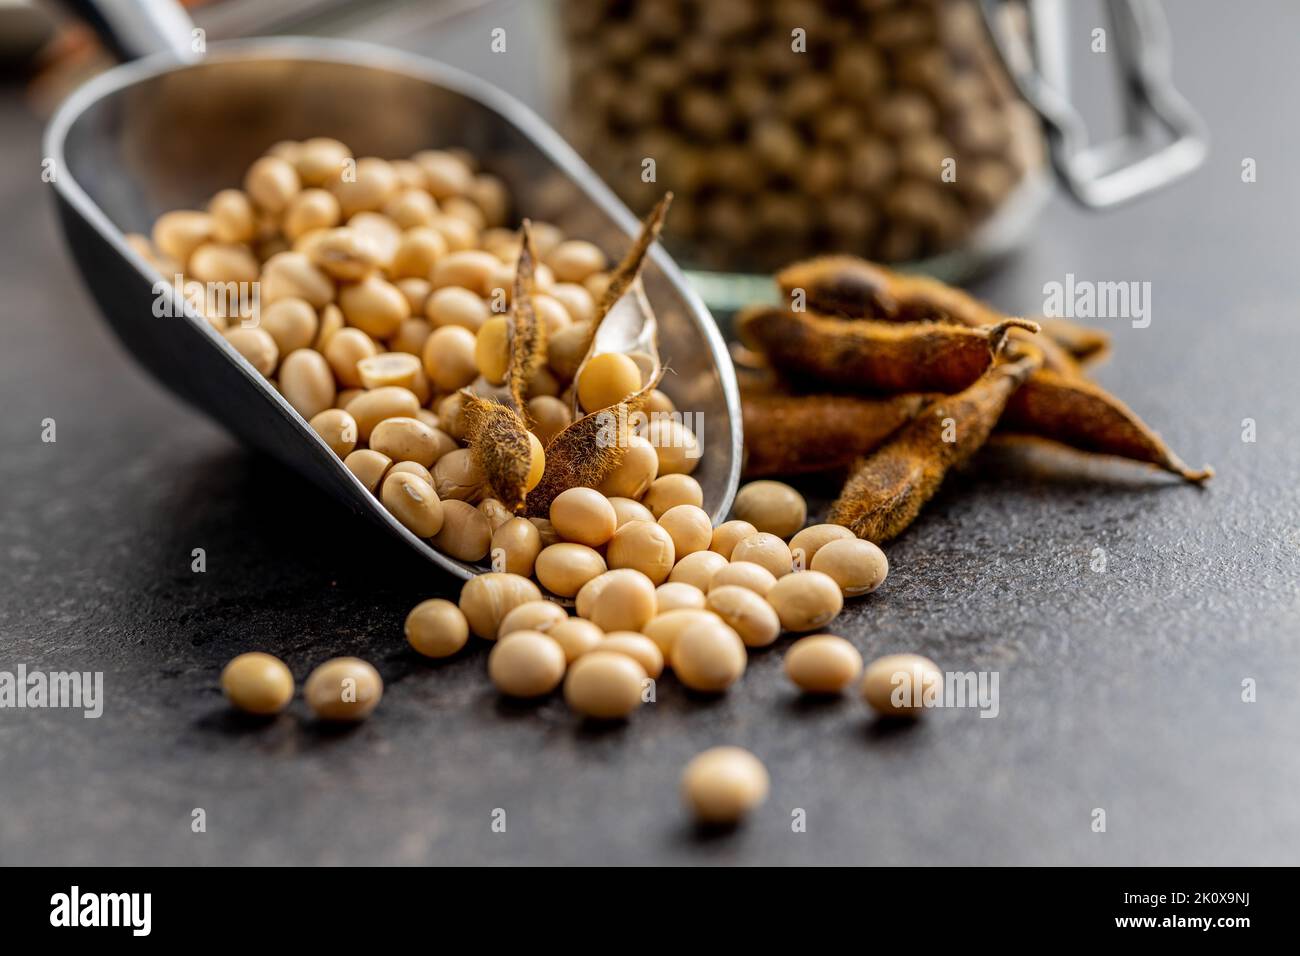 Soy beans. Dried soybean pod in scoop on the black table. Stock Photo